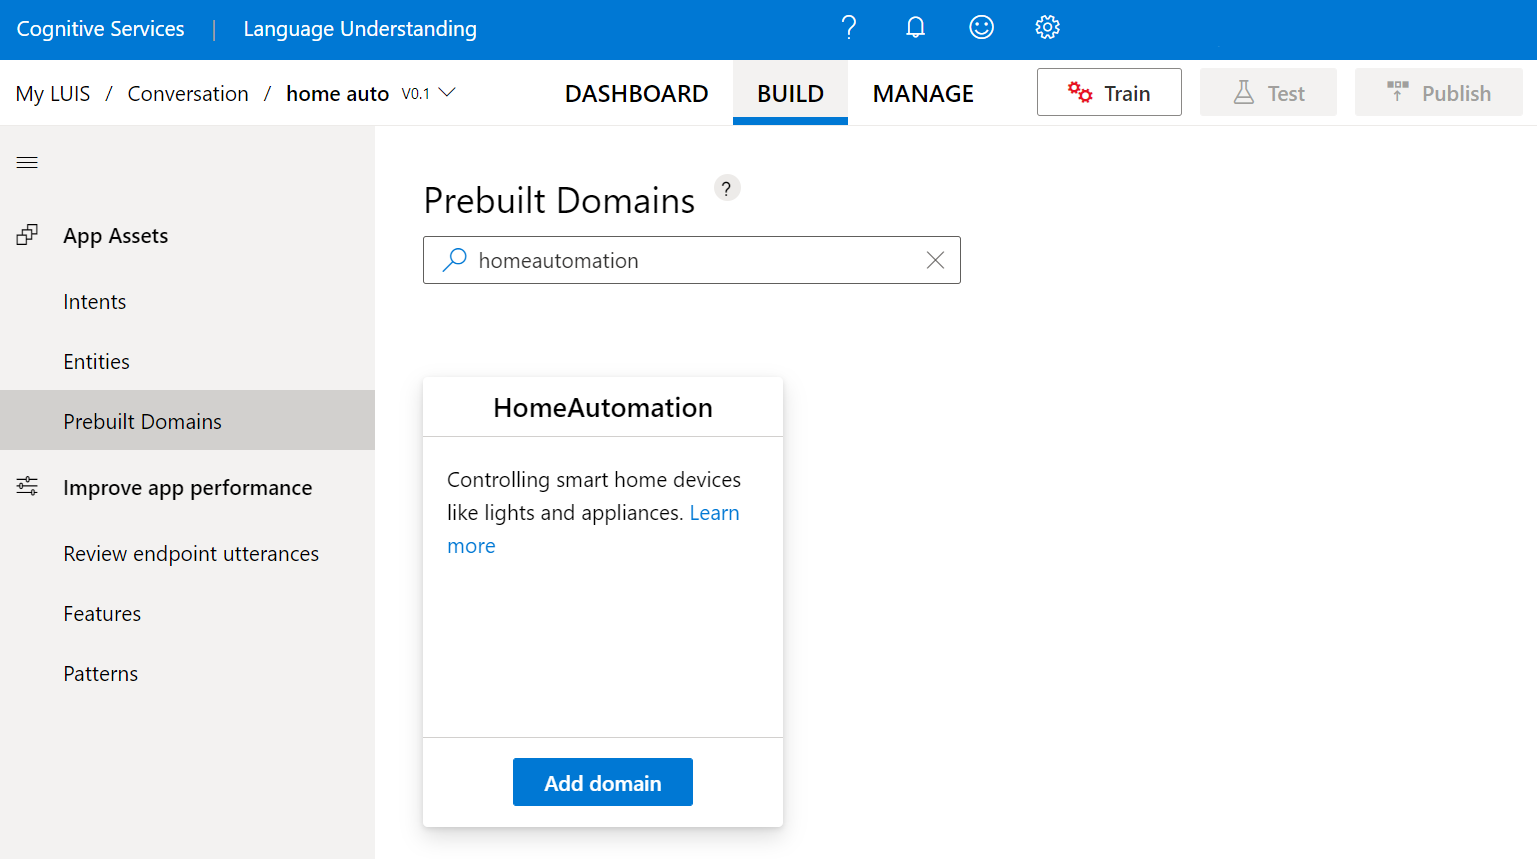 Select 'Prebuilt domains' then search for 'HomeAutomation'. Select 'Add domain' on the HomeAutomation card.